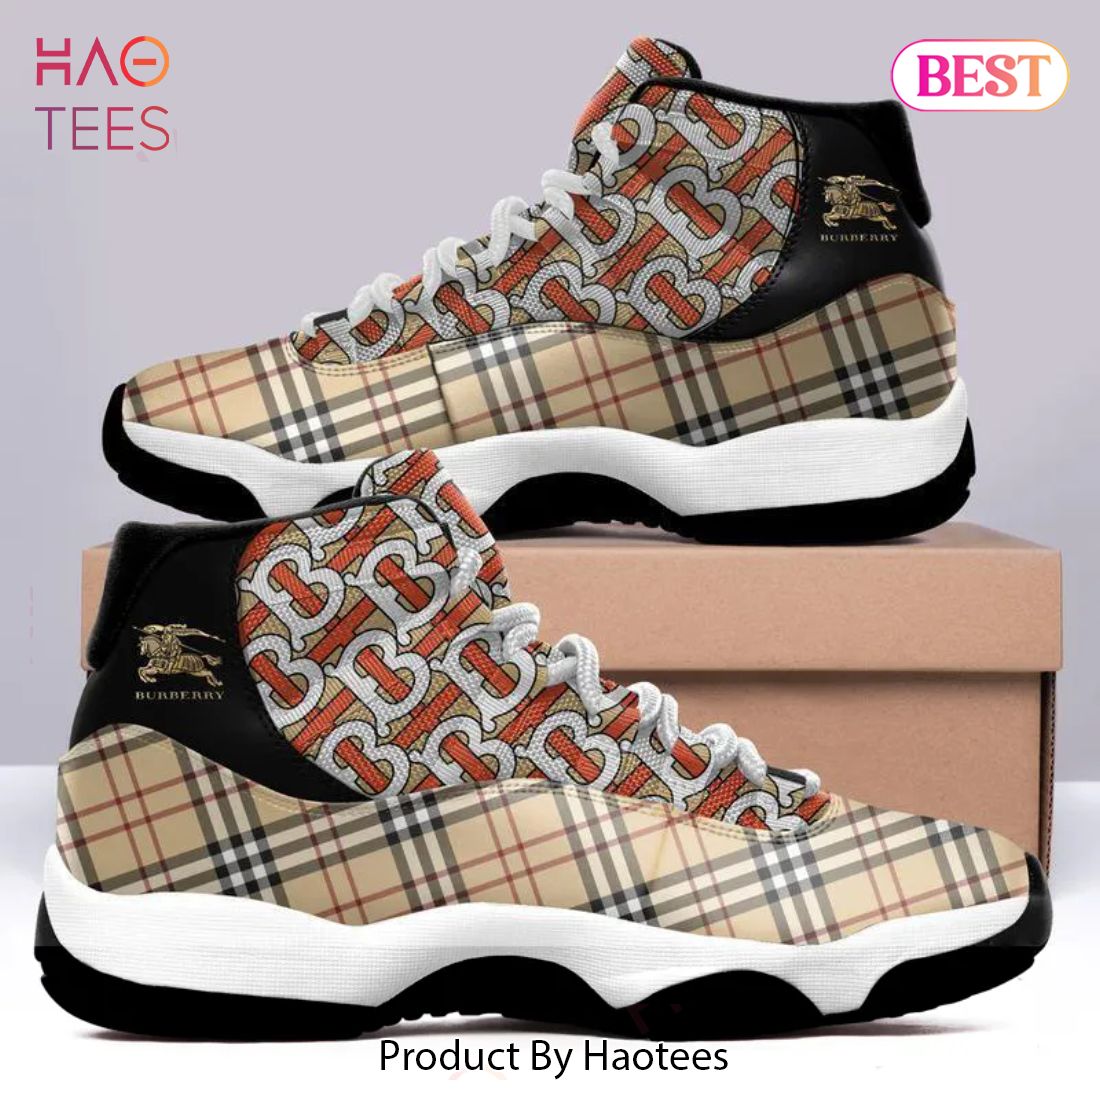 [NEW FASHION] Luxury Burberry Air Jordan 11 Sneakers Shoes Hot 2023 Gifts For Men Women